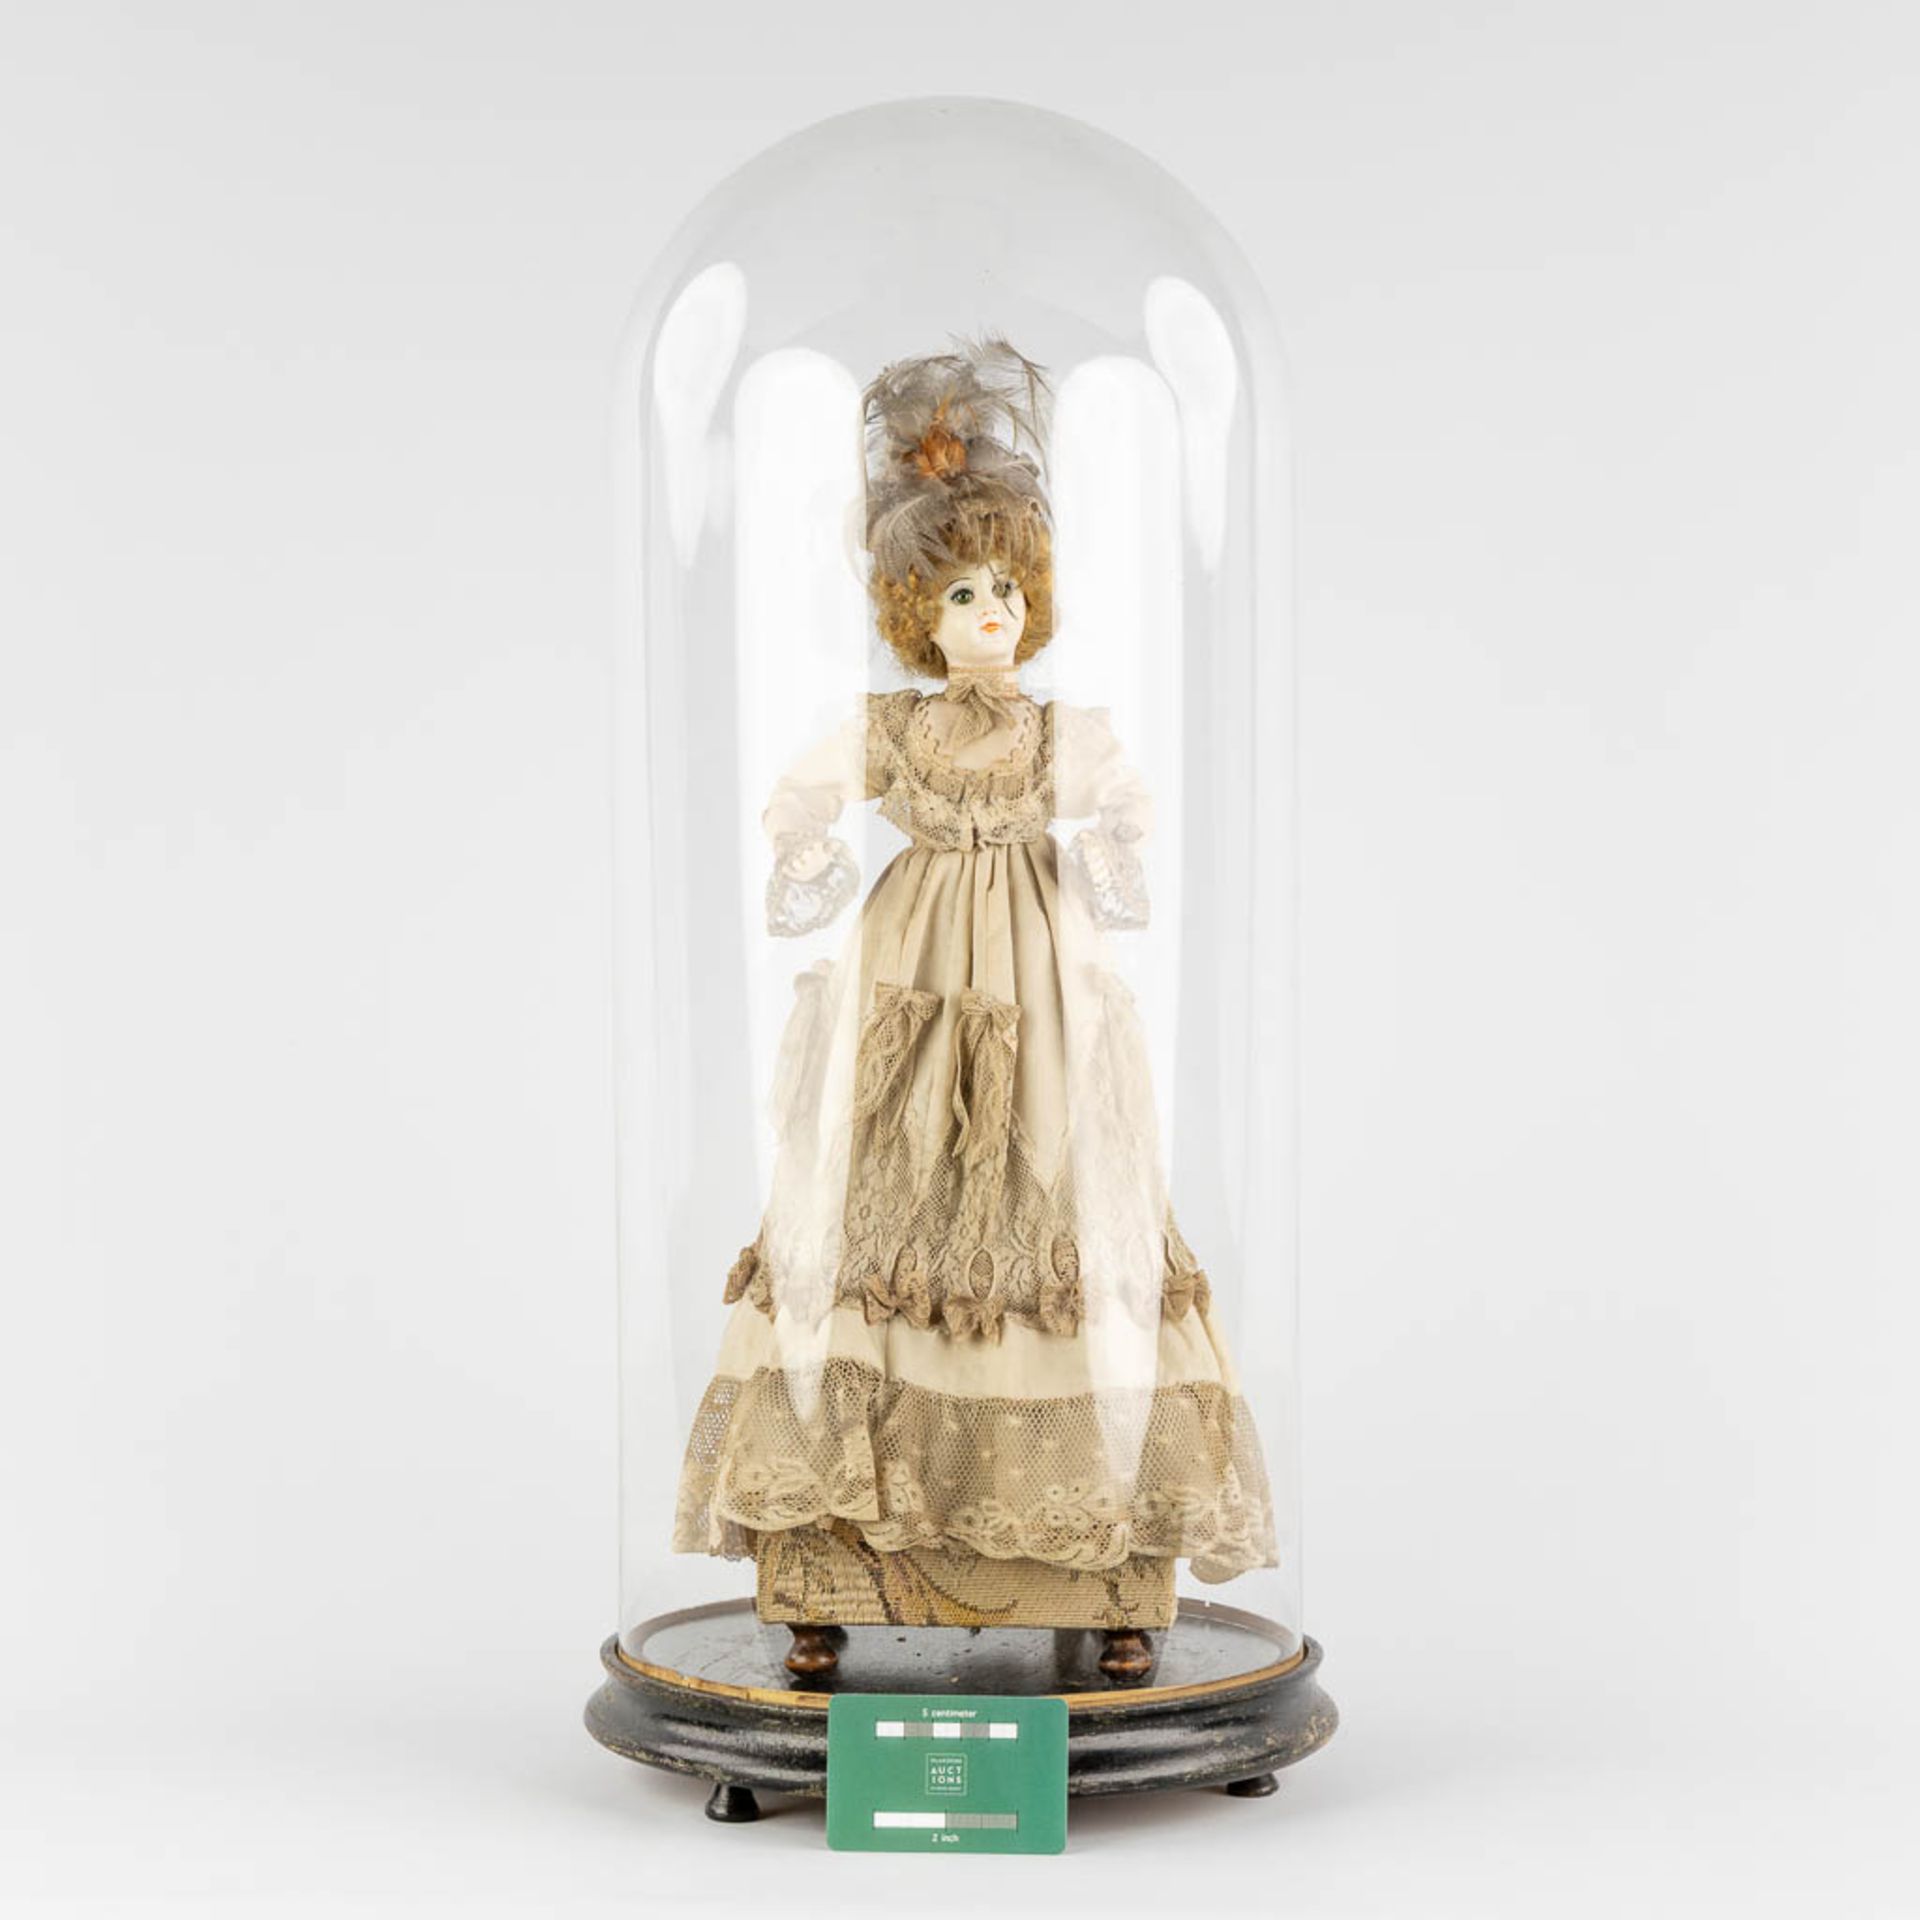 An antique 'Automata', in lace dressed doll with a music box. Under a glass dome, Circa 1920. (H:48 - Image 2 of 13